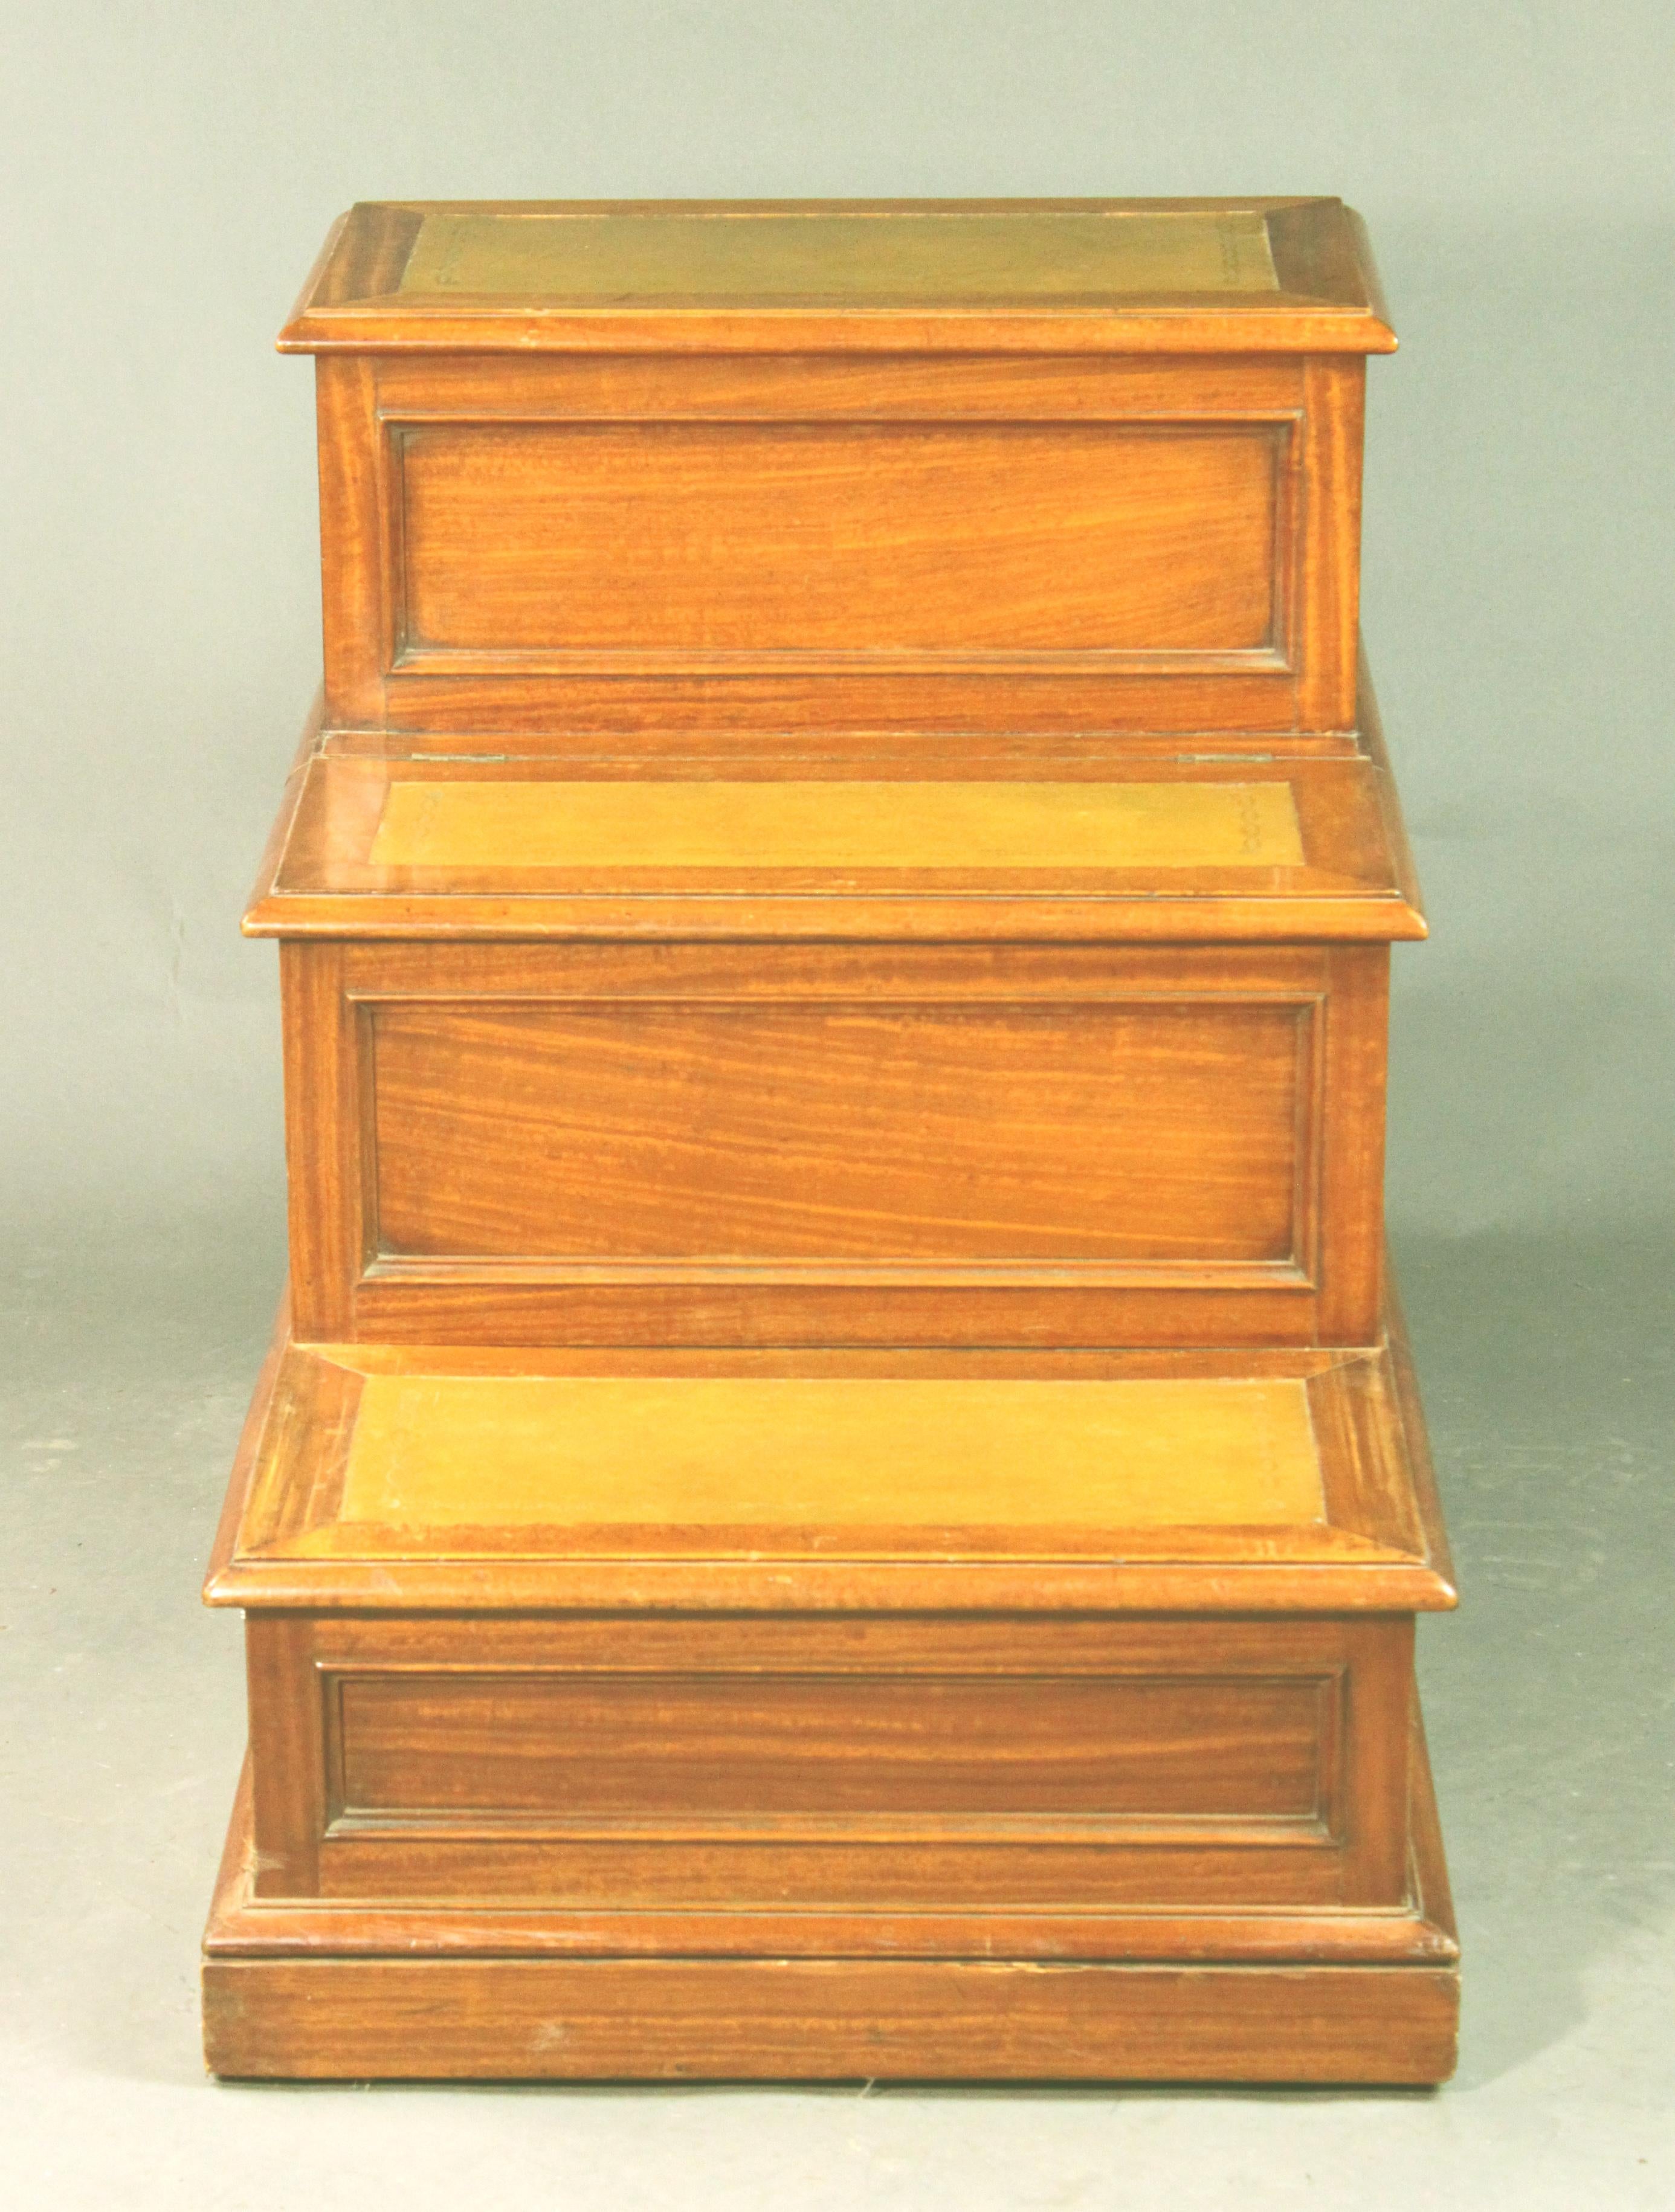 Unusual satinwood bedsteps of a good generous size; still retains its original interior though this could easily be modified; three steps with leather inserts on each step; was originally a piece of furniture for the dining room or library.